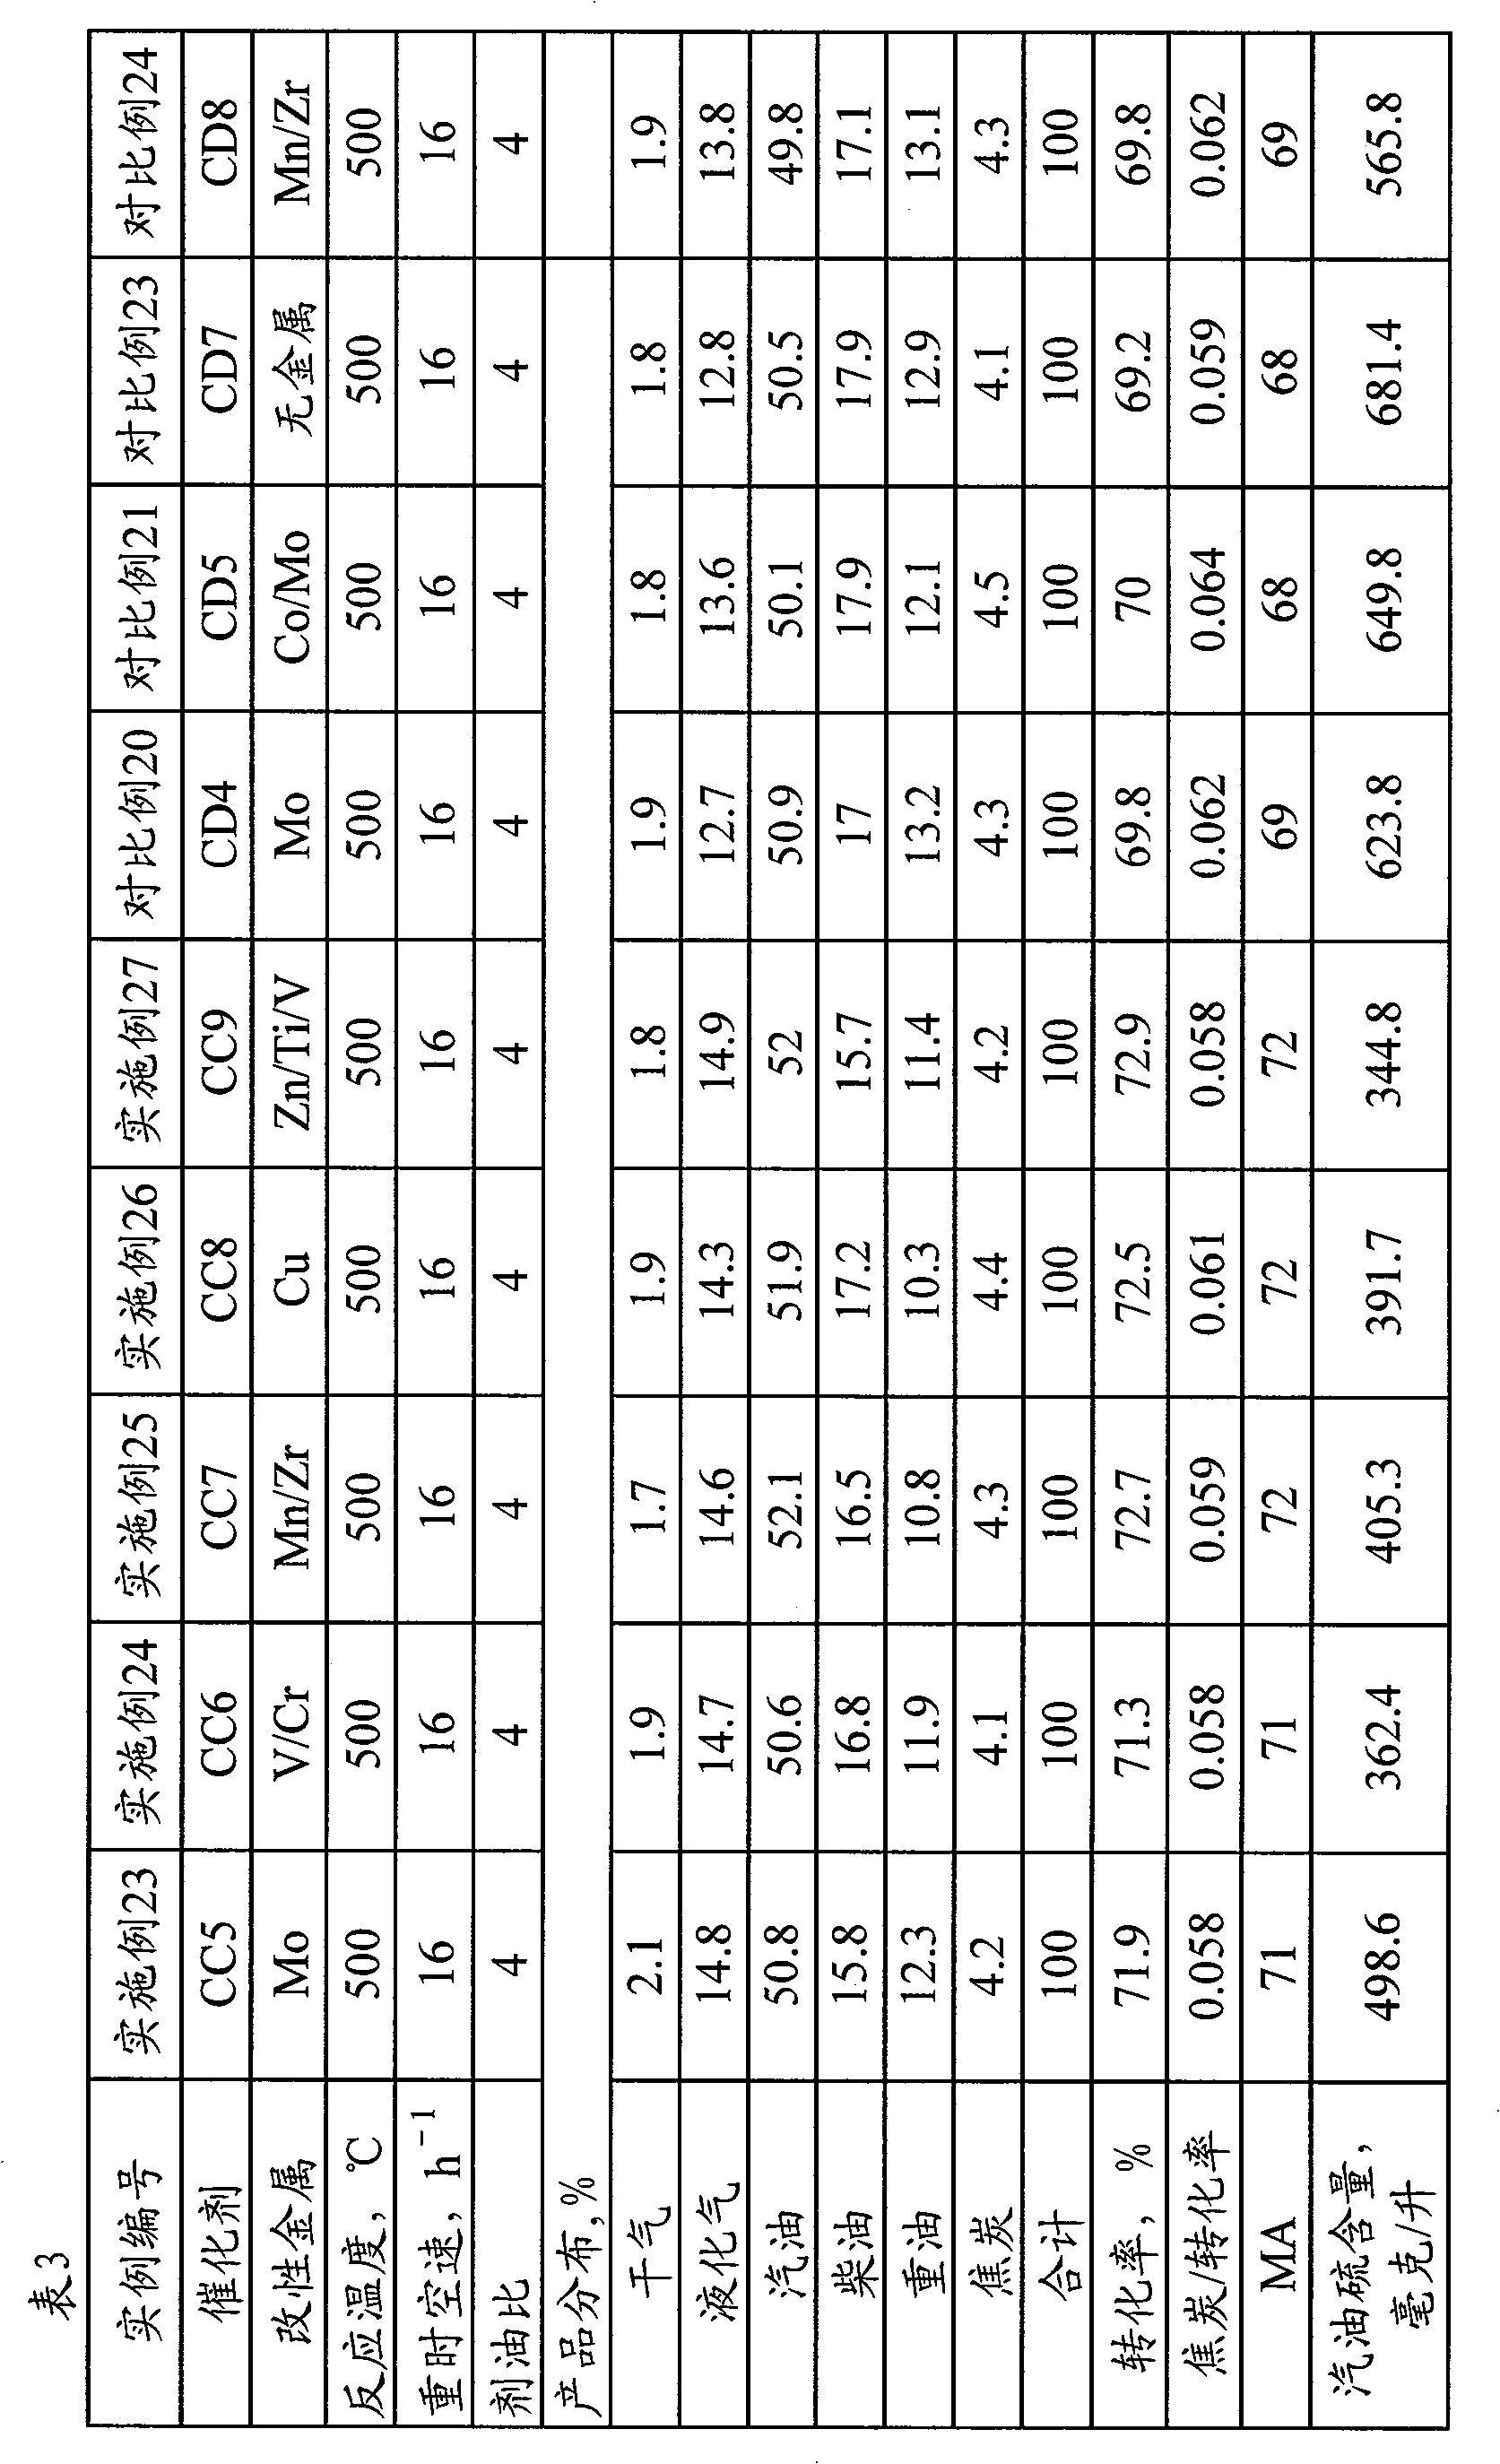 Hydrated alumina containing metallic element and method for preparing the same